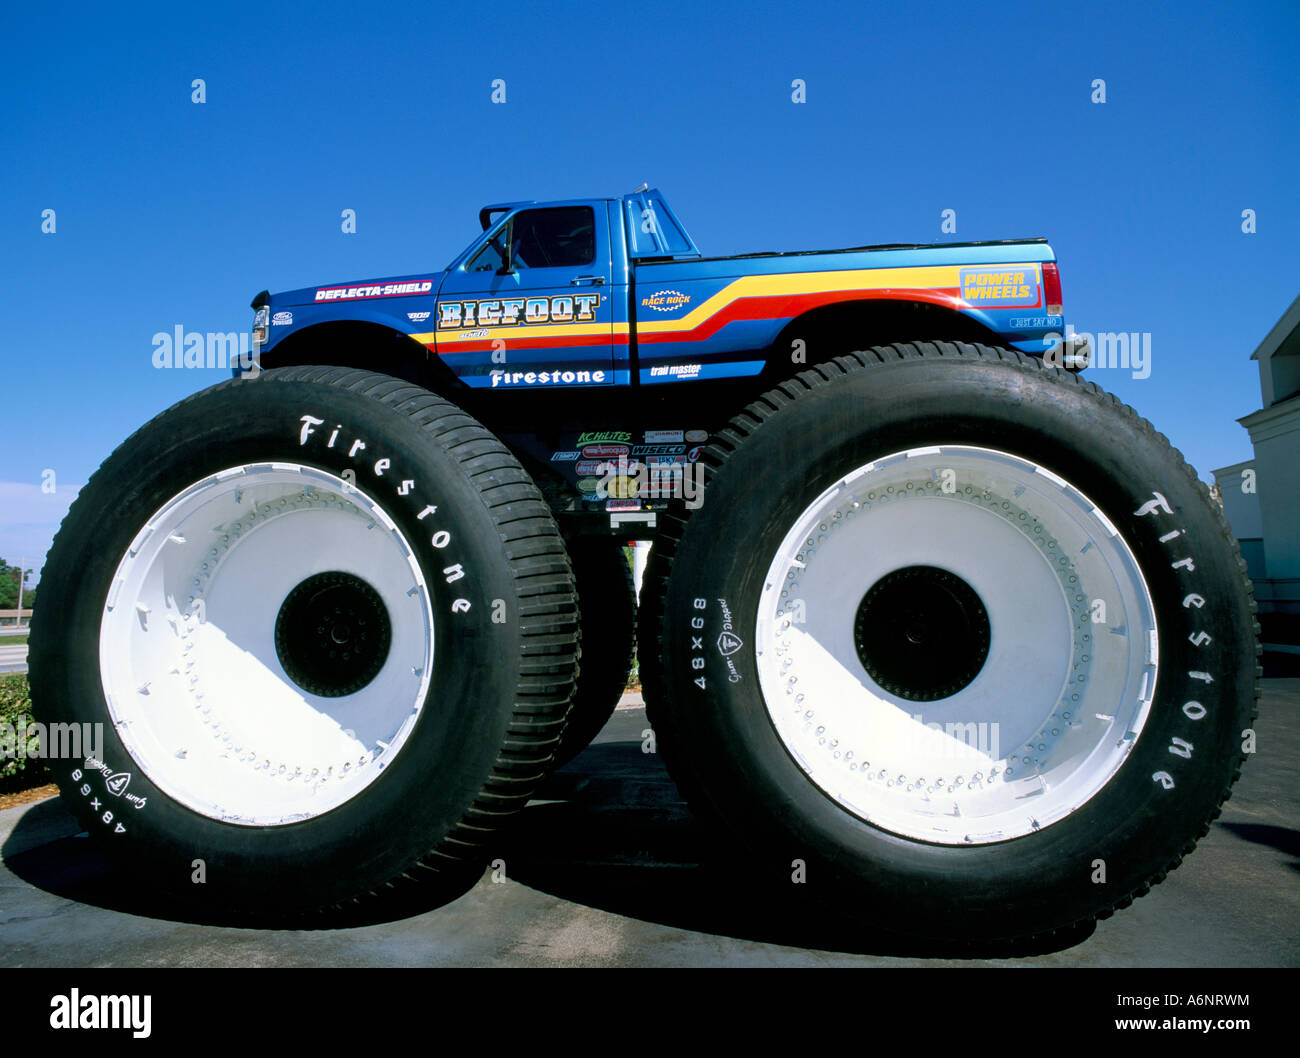 Huge tyres Big Foot customised car United States of America North America Stock Photo